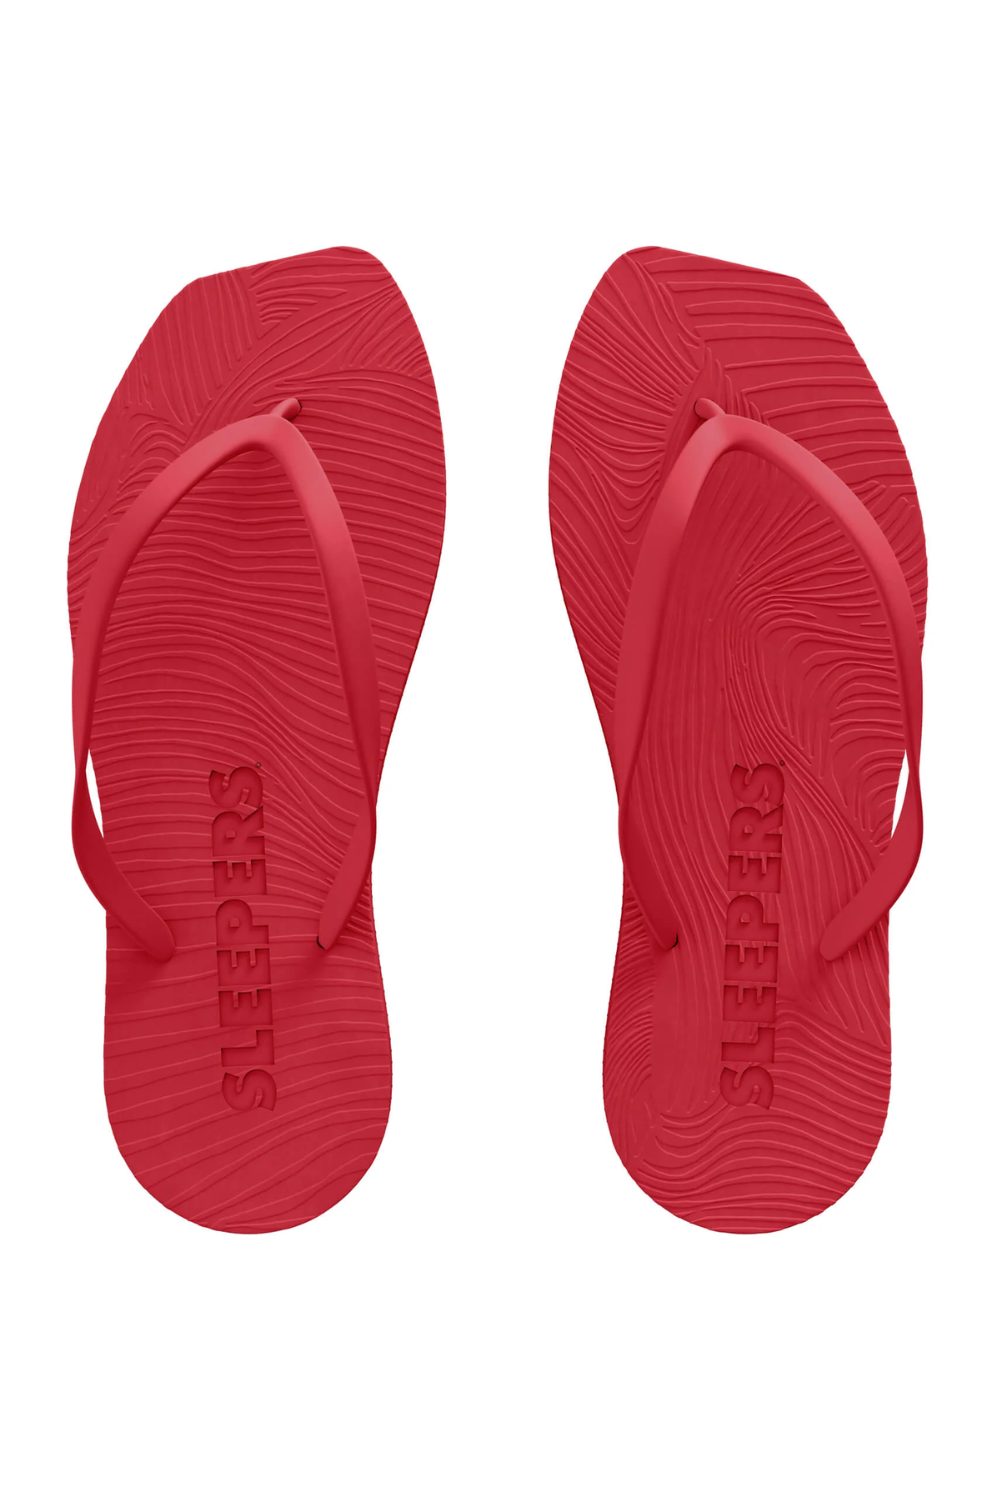 Sleepers Tapered Red Flip Flop